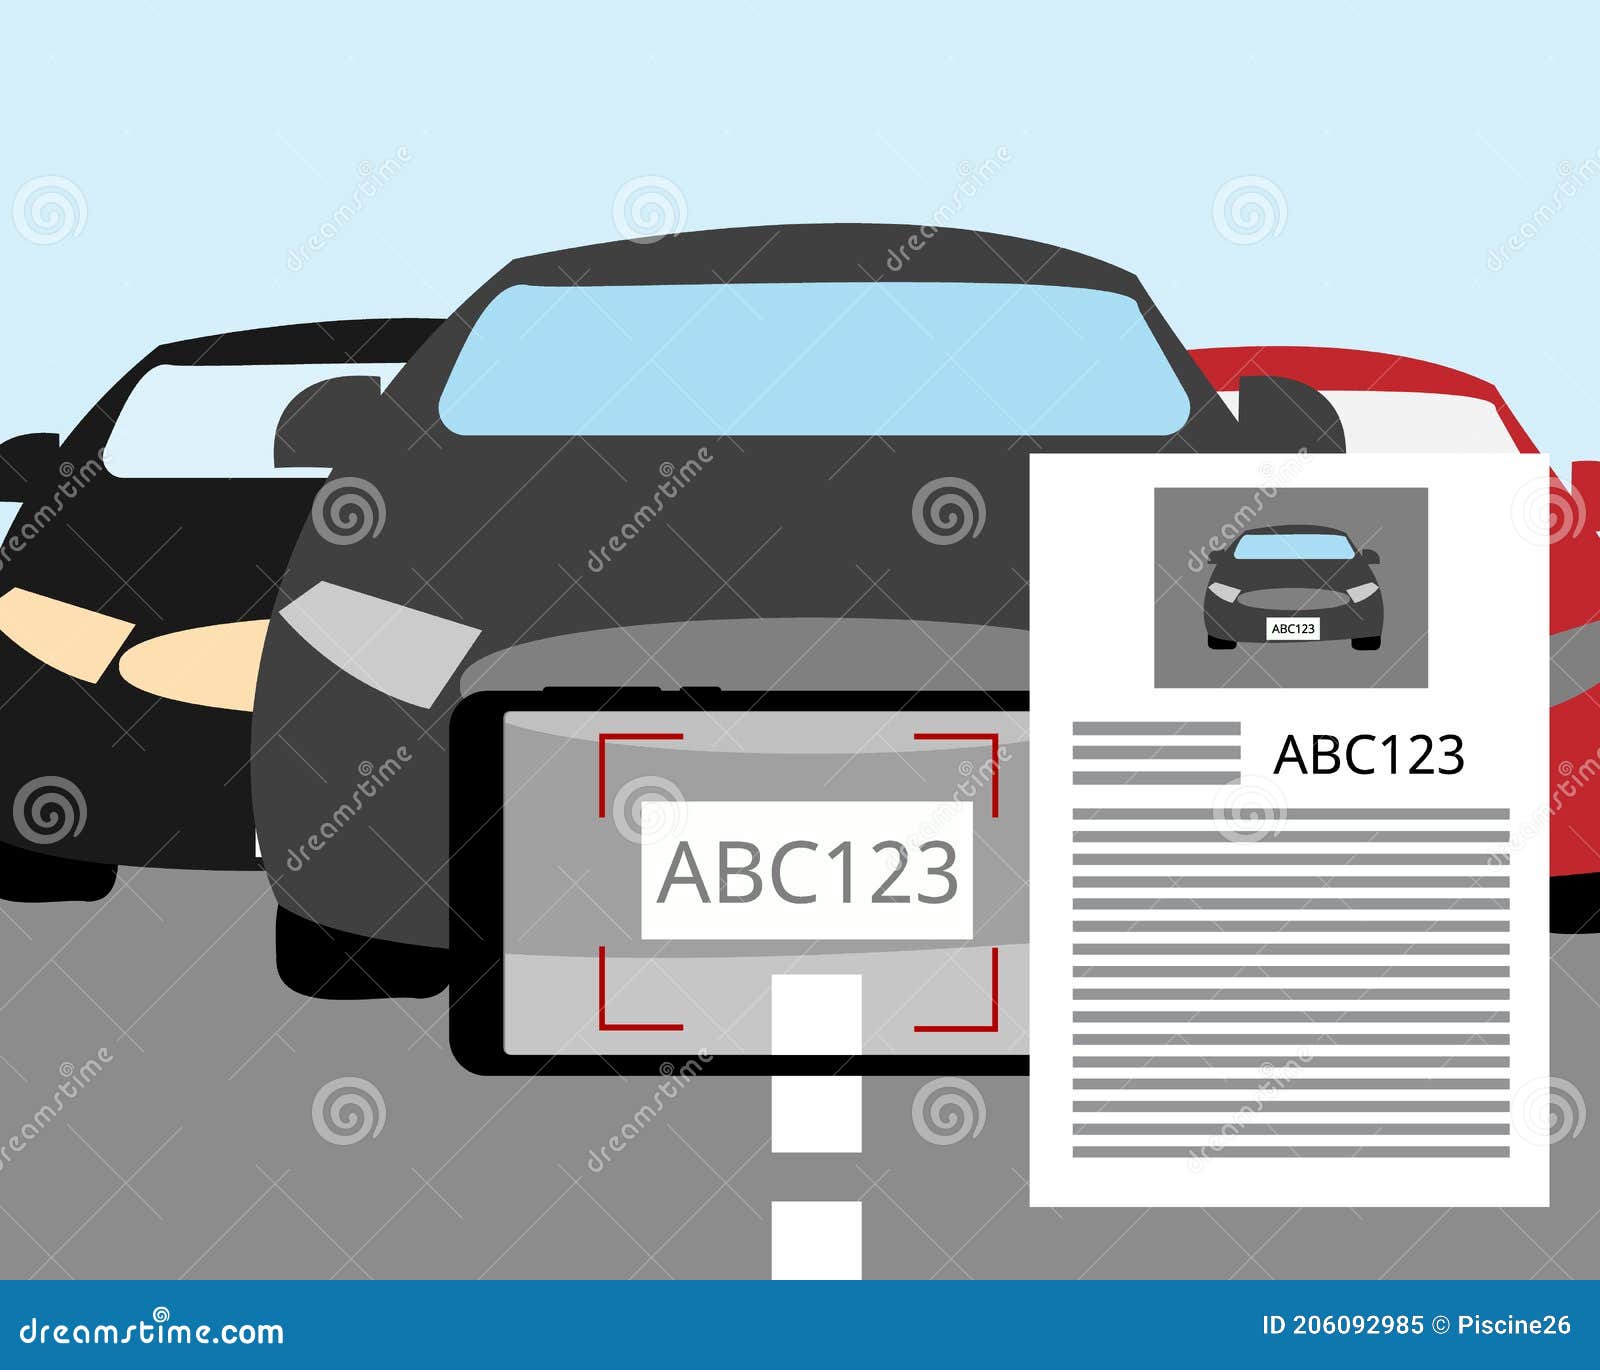 optical character recognition ocr technology to check the car speed and license plate number on the street 